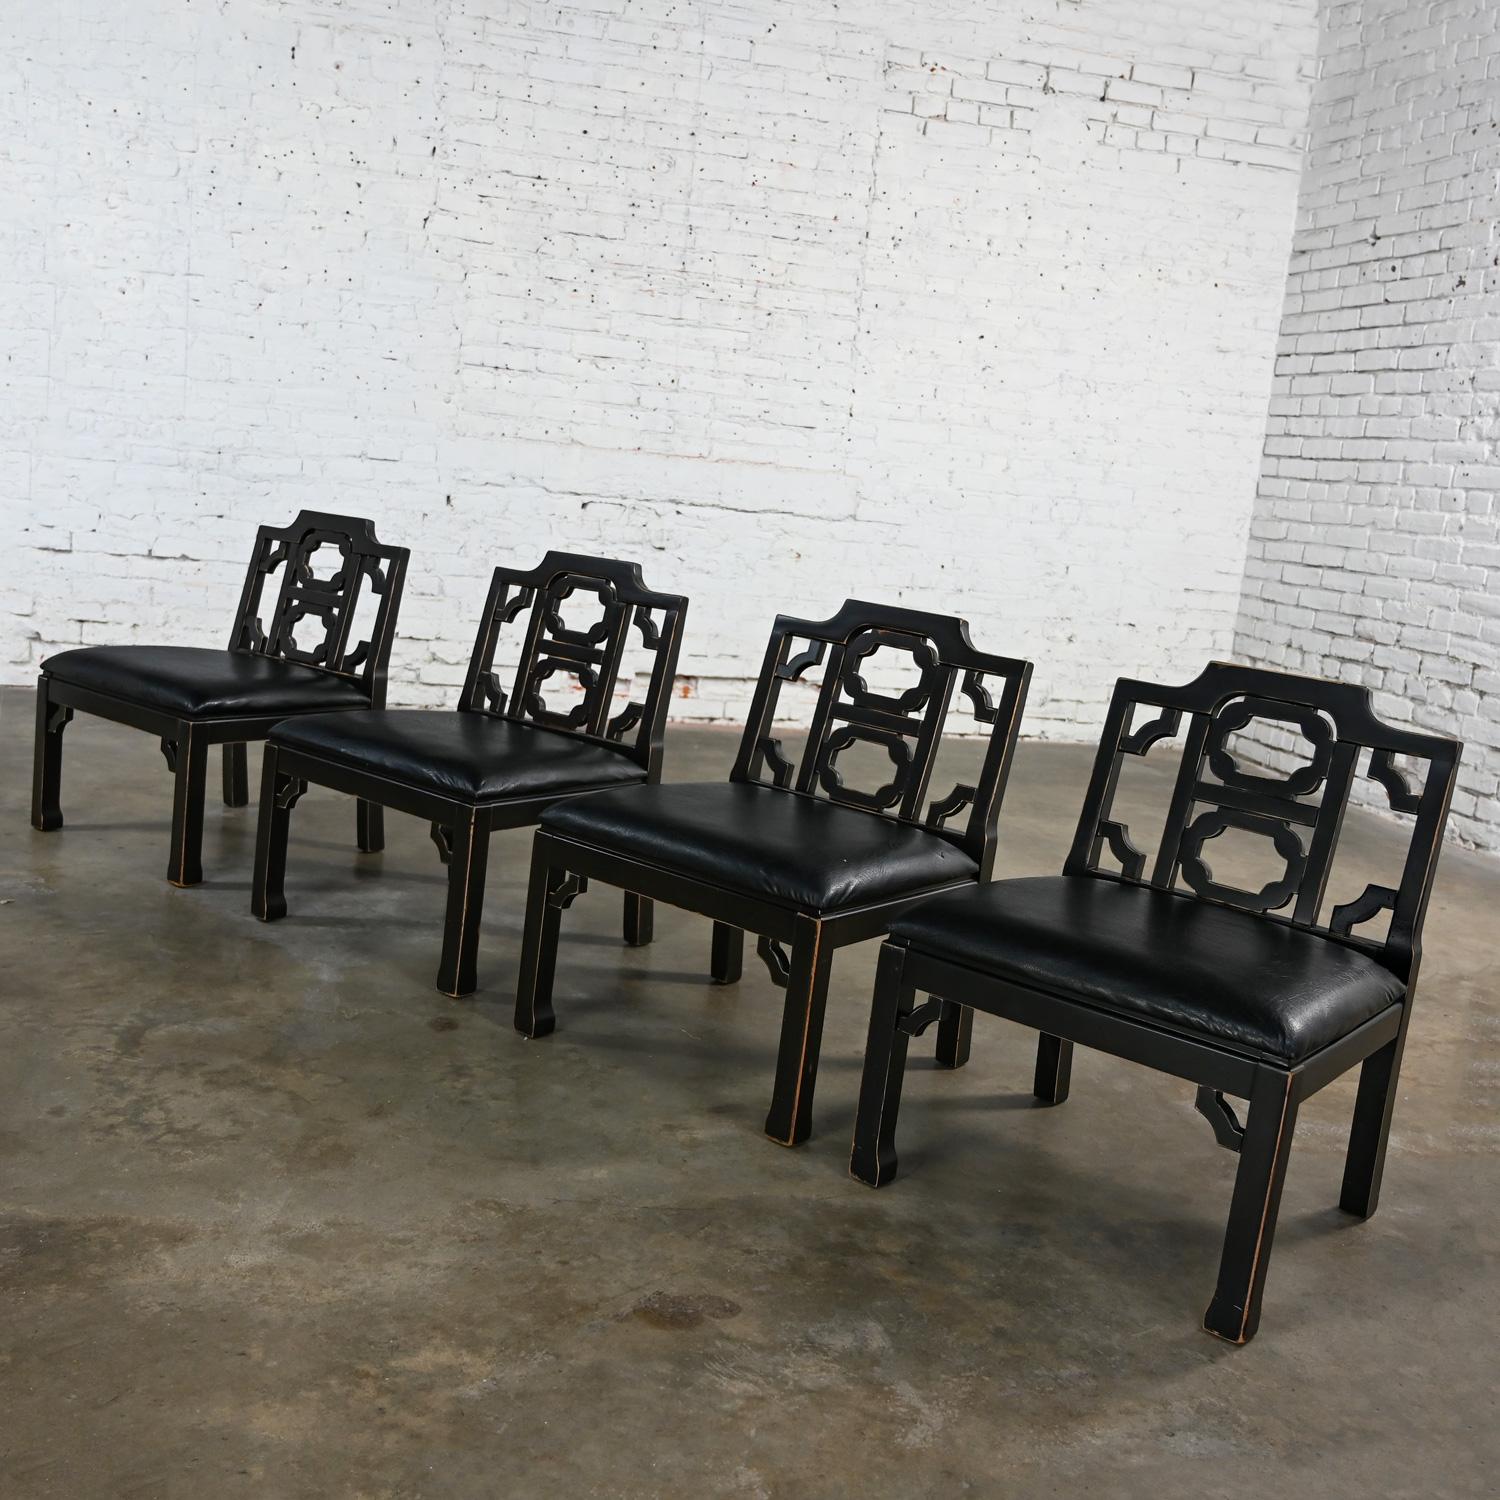 4 Hollywood Regency Chinese Chippendale Style Black Accent Chairs by Thomasville For Sale 12